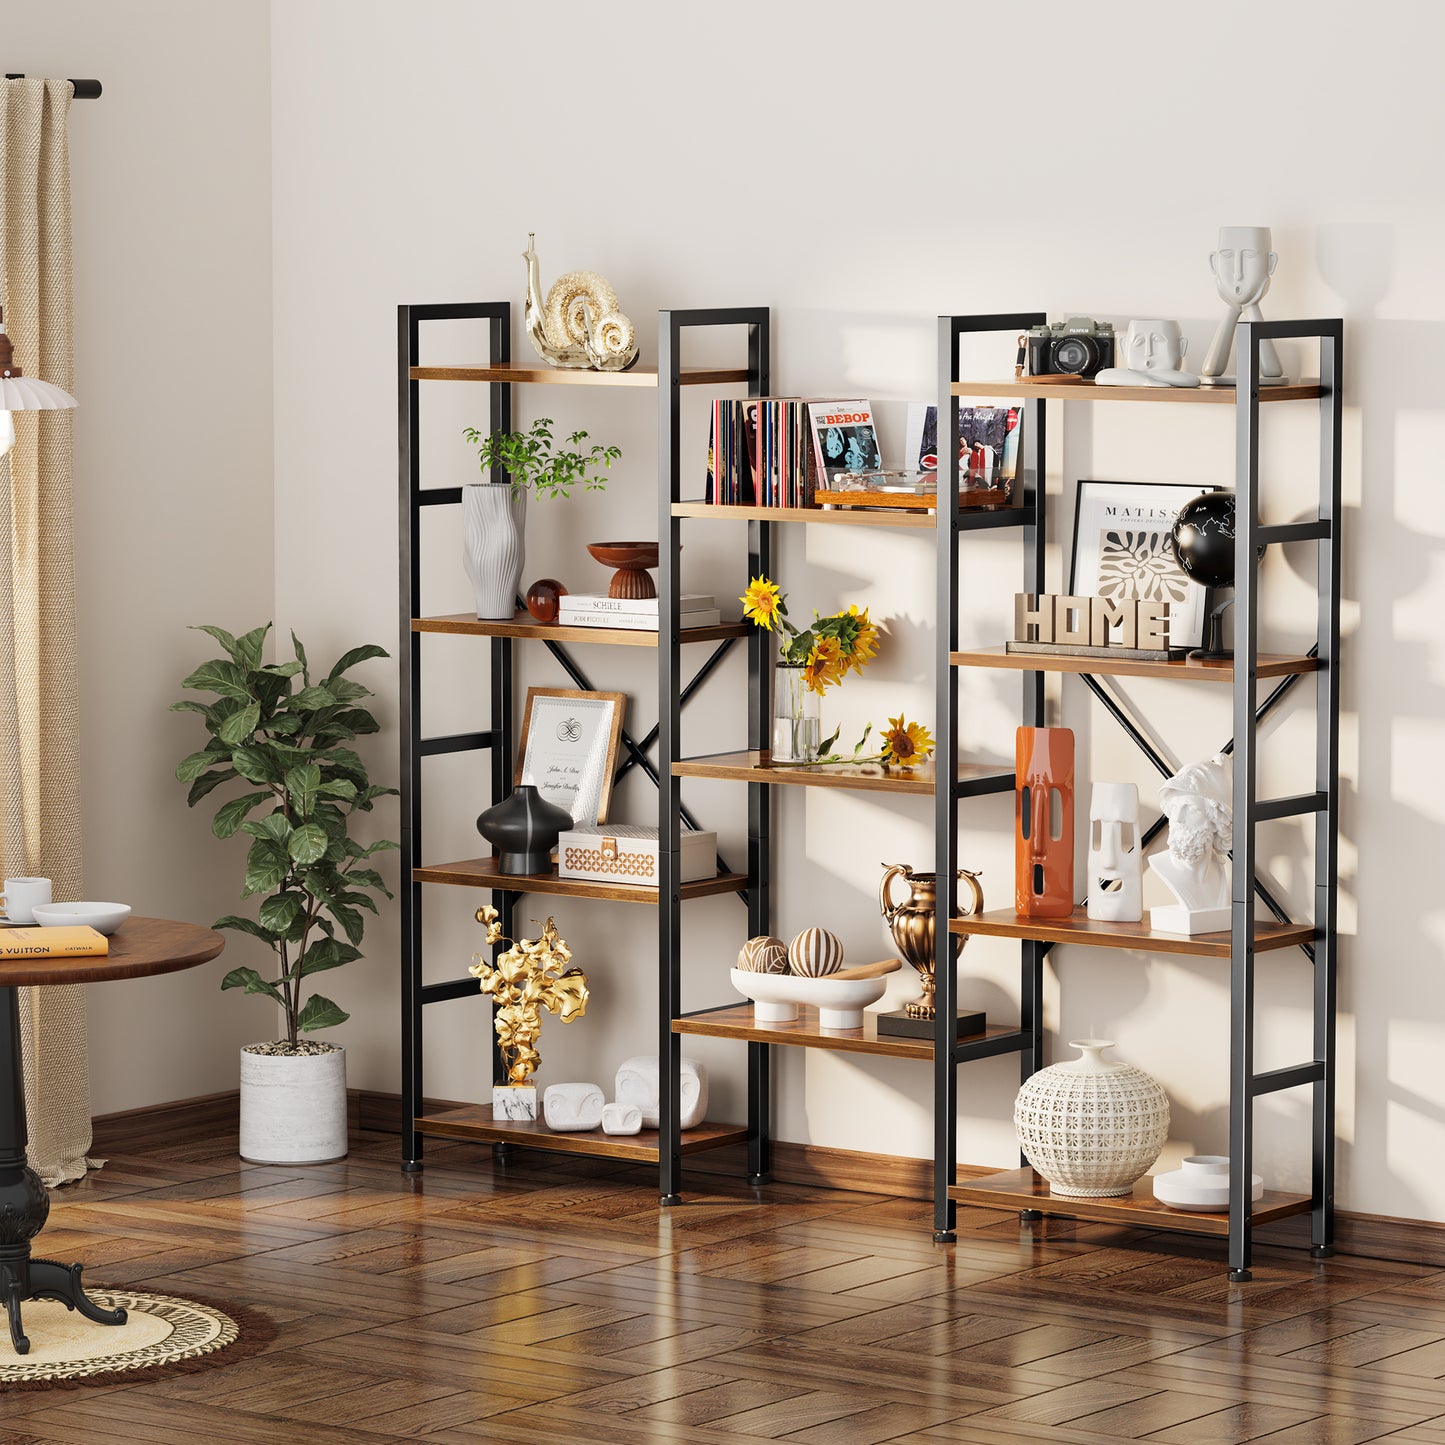 SUPERJARE Triple 4 Tier Bookshelf, Bookcase with 11 Open Display Shelves, Wide Book Shelf Book Case for Home & Office, Rustic Brown